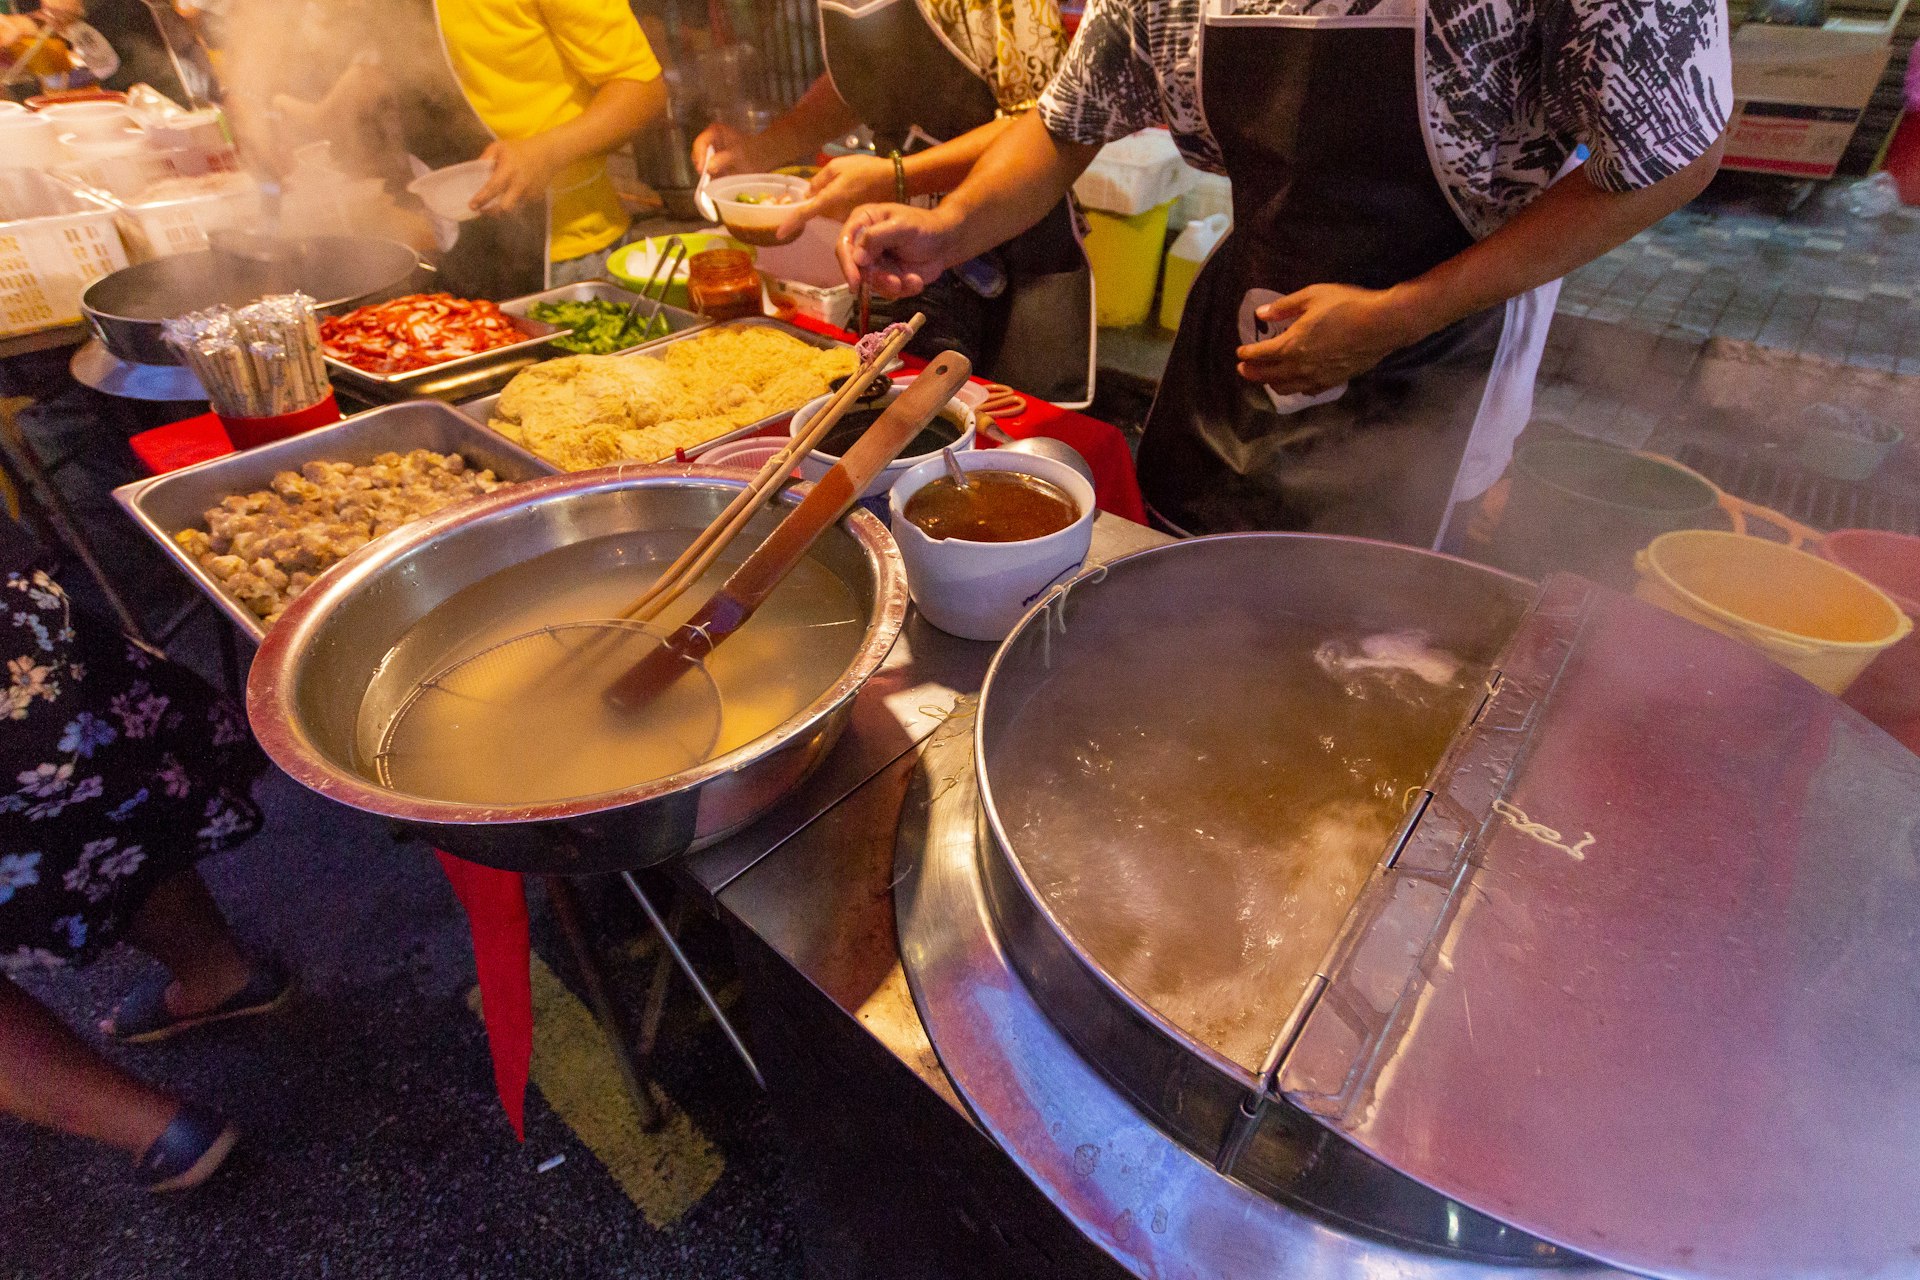 Looking down on a street food stall. There is a huge, stainless-steel vat of boiling water, and the vendors are only visible from the torso down; they are spooning various ingredients from different containers. 